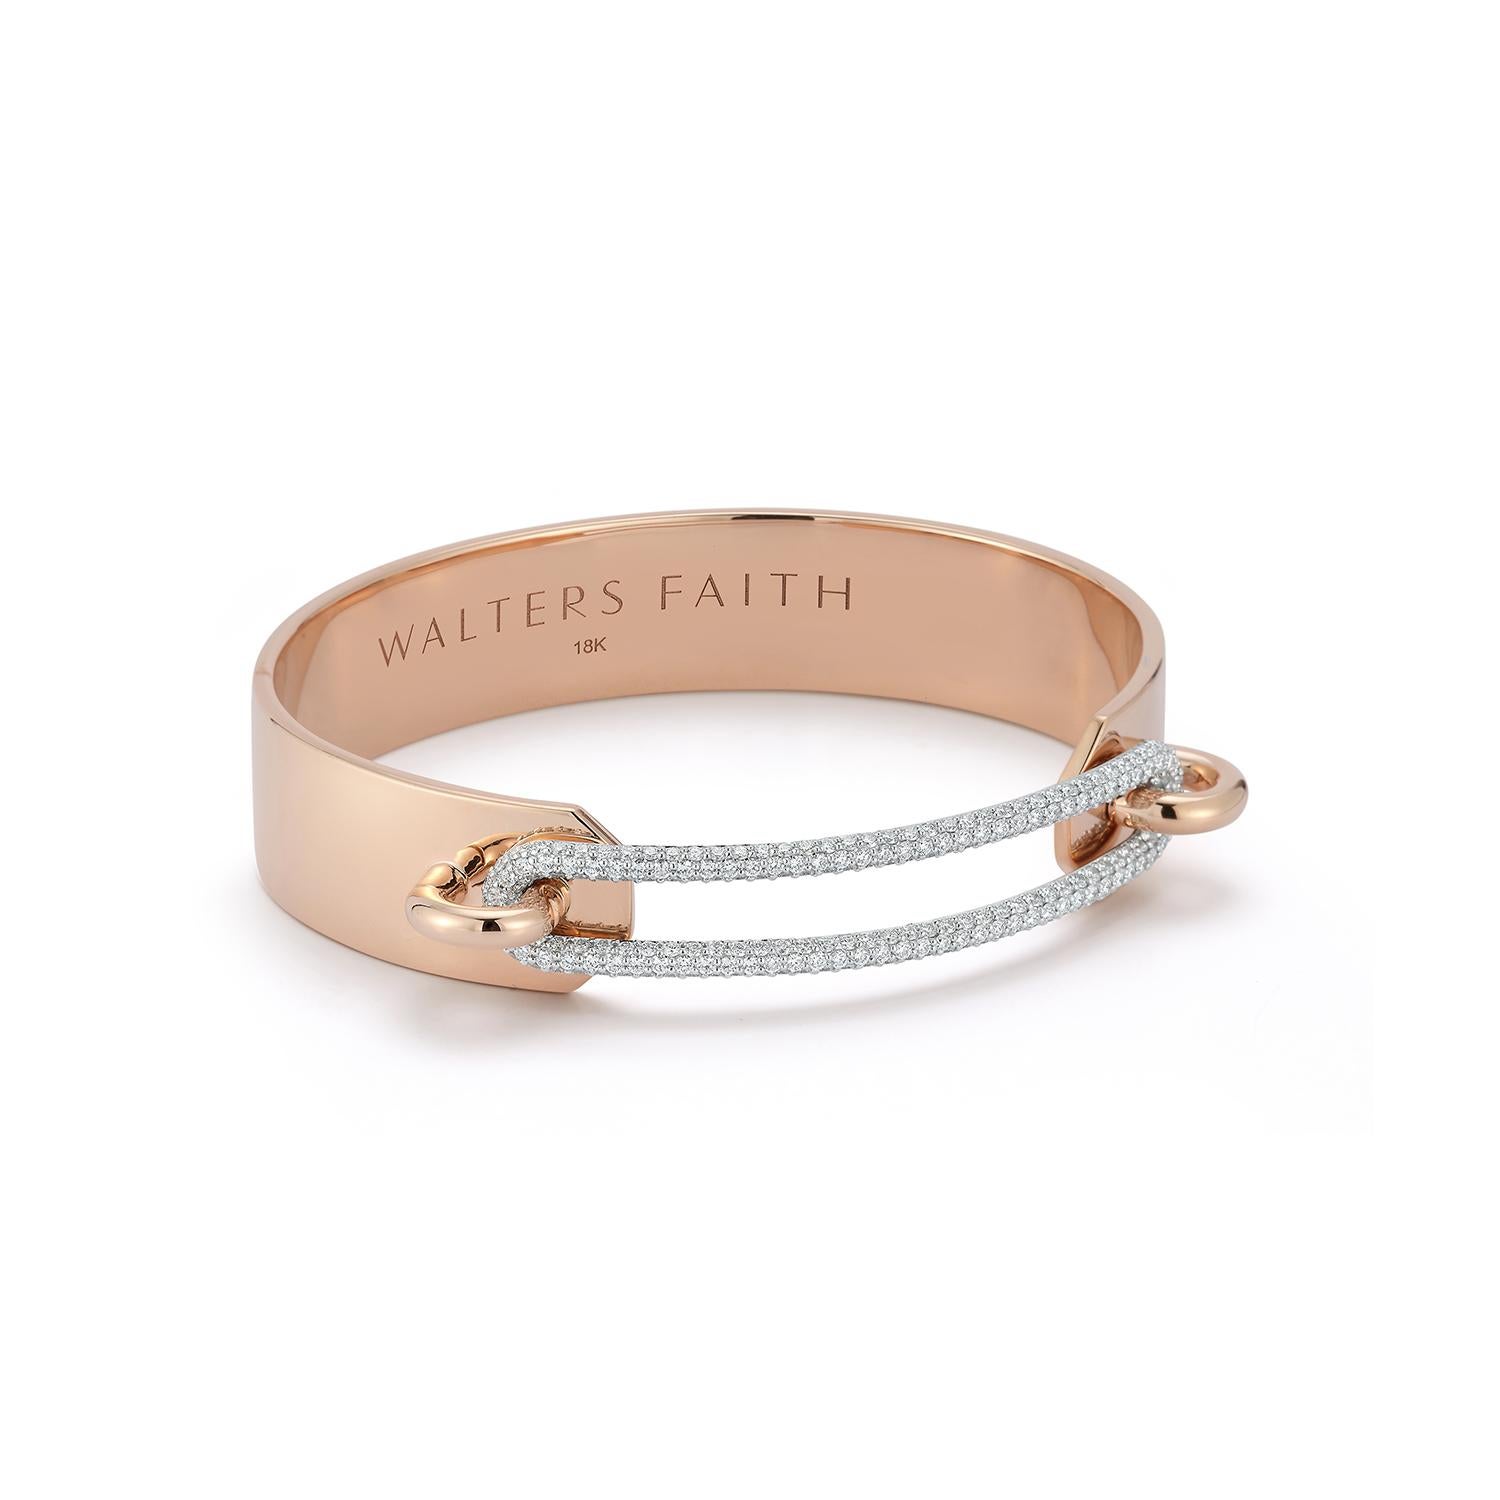 Walters Faith's Morell Collection 18K Rose Gold Cuff Bracelet with Elongated Diamond Link. 1.63 Diamond Carat Weight. Bracelet size is a 6.5